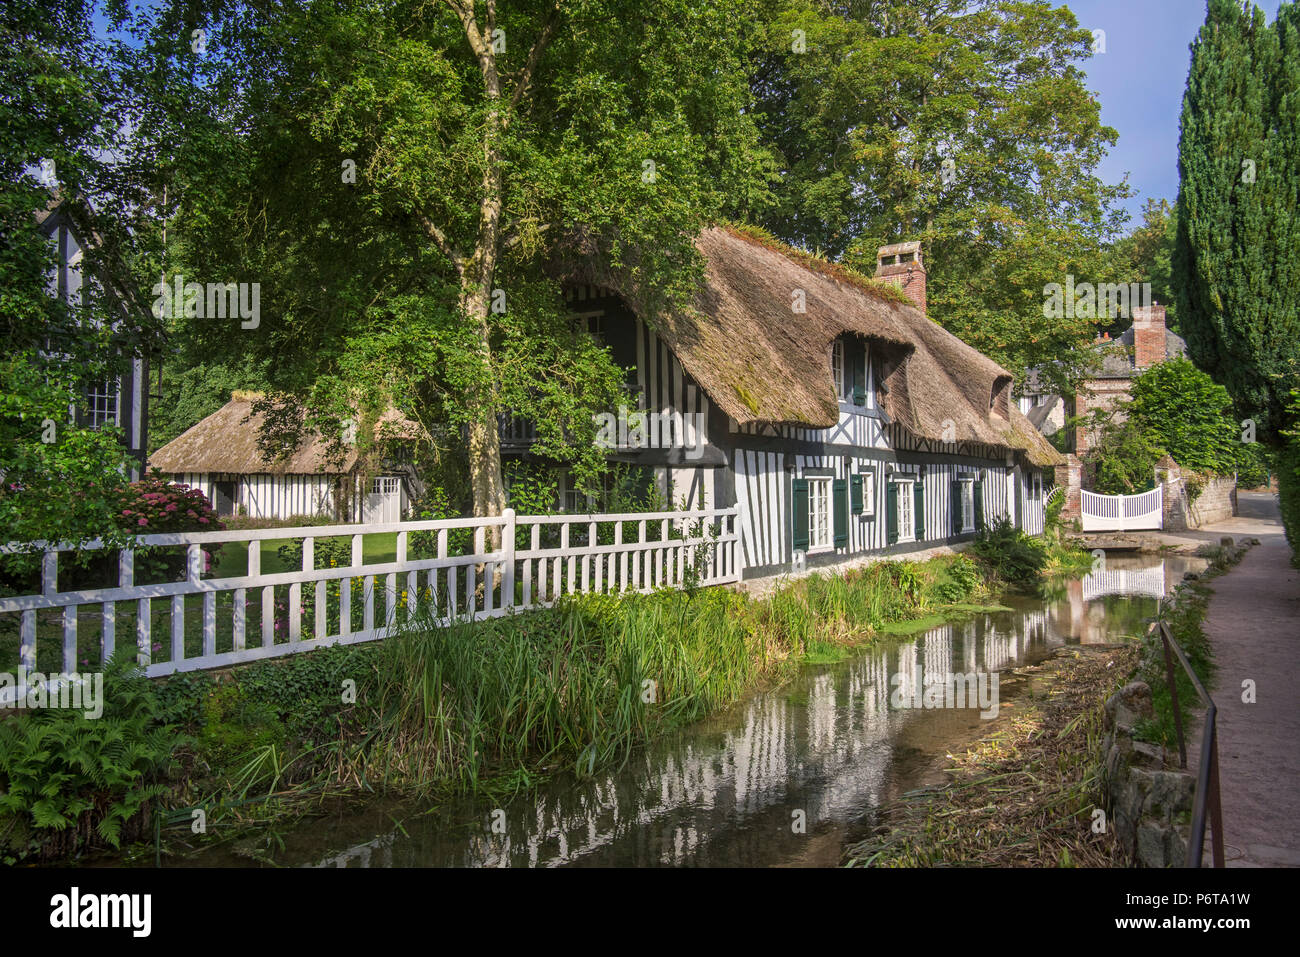 Timber-framed house with thatched roof along the river Veules, France's shortest river at Veules-les-Roses, Seine-Maritime, Côte d'Albâtre, Normandy Stock Photo